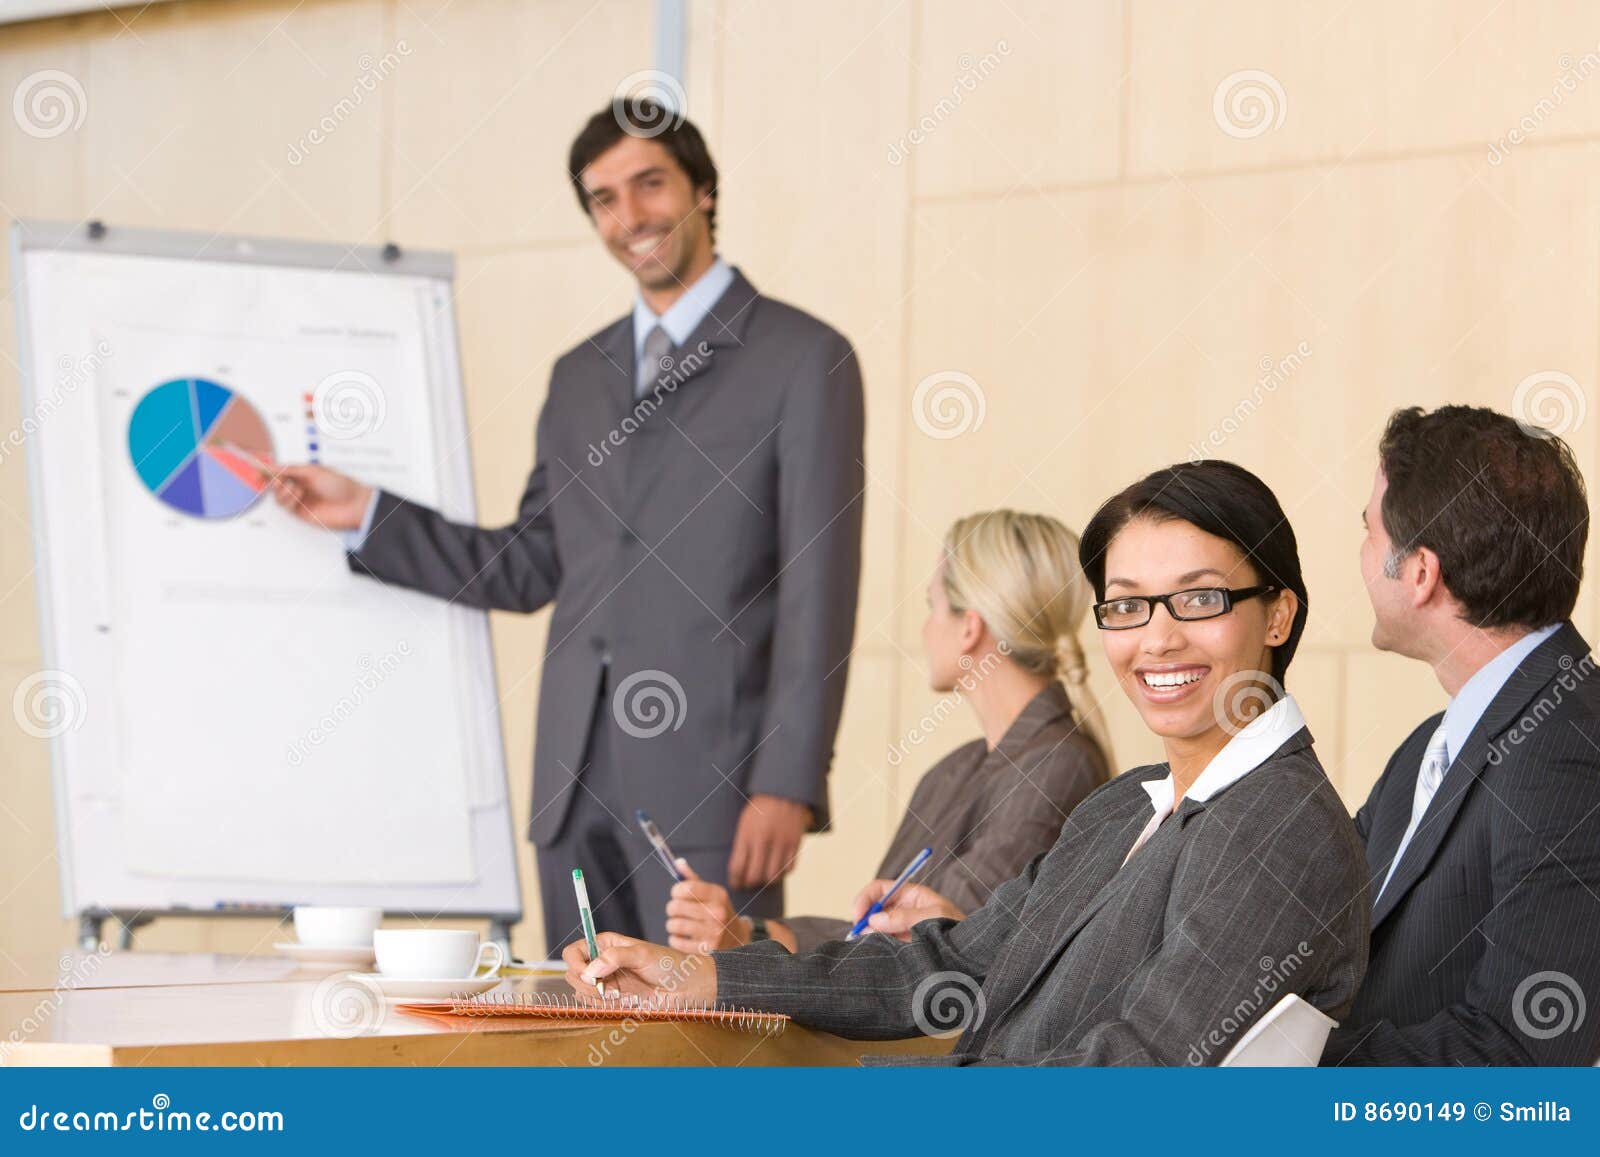 person who gives presentation is called